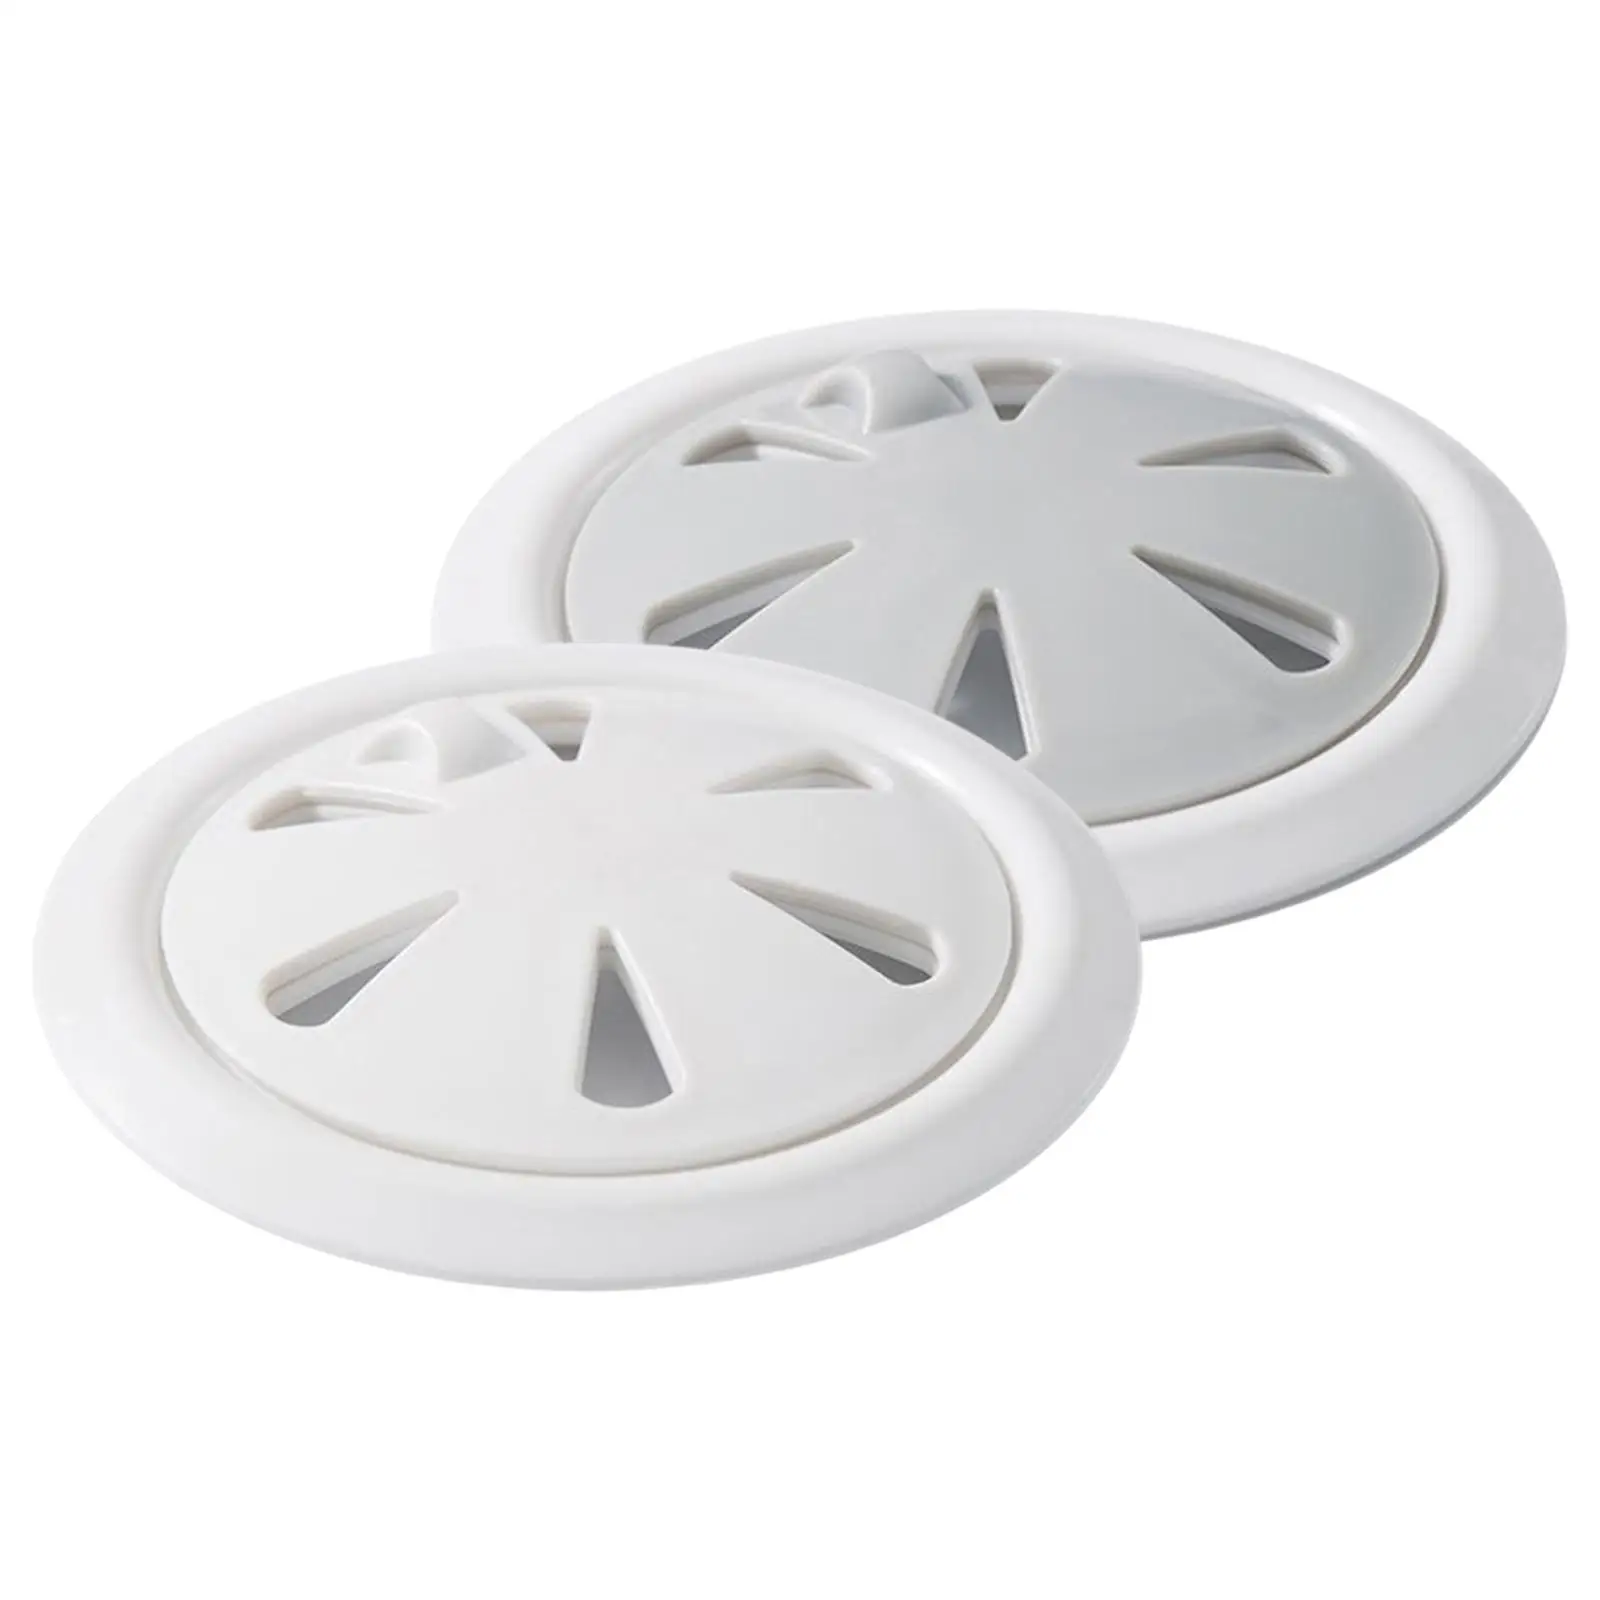 Shower Drain Catcher Round Easy Suction Cup PP Flat Strainer Filter Stopper for Sink Bathtub